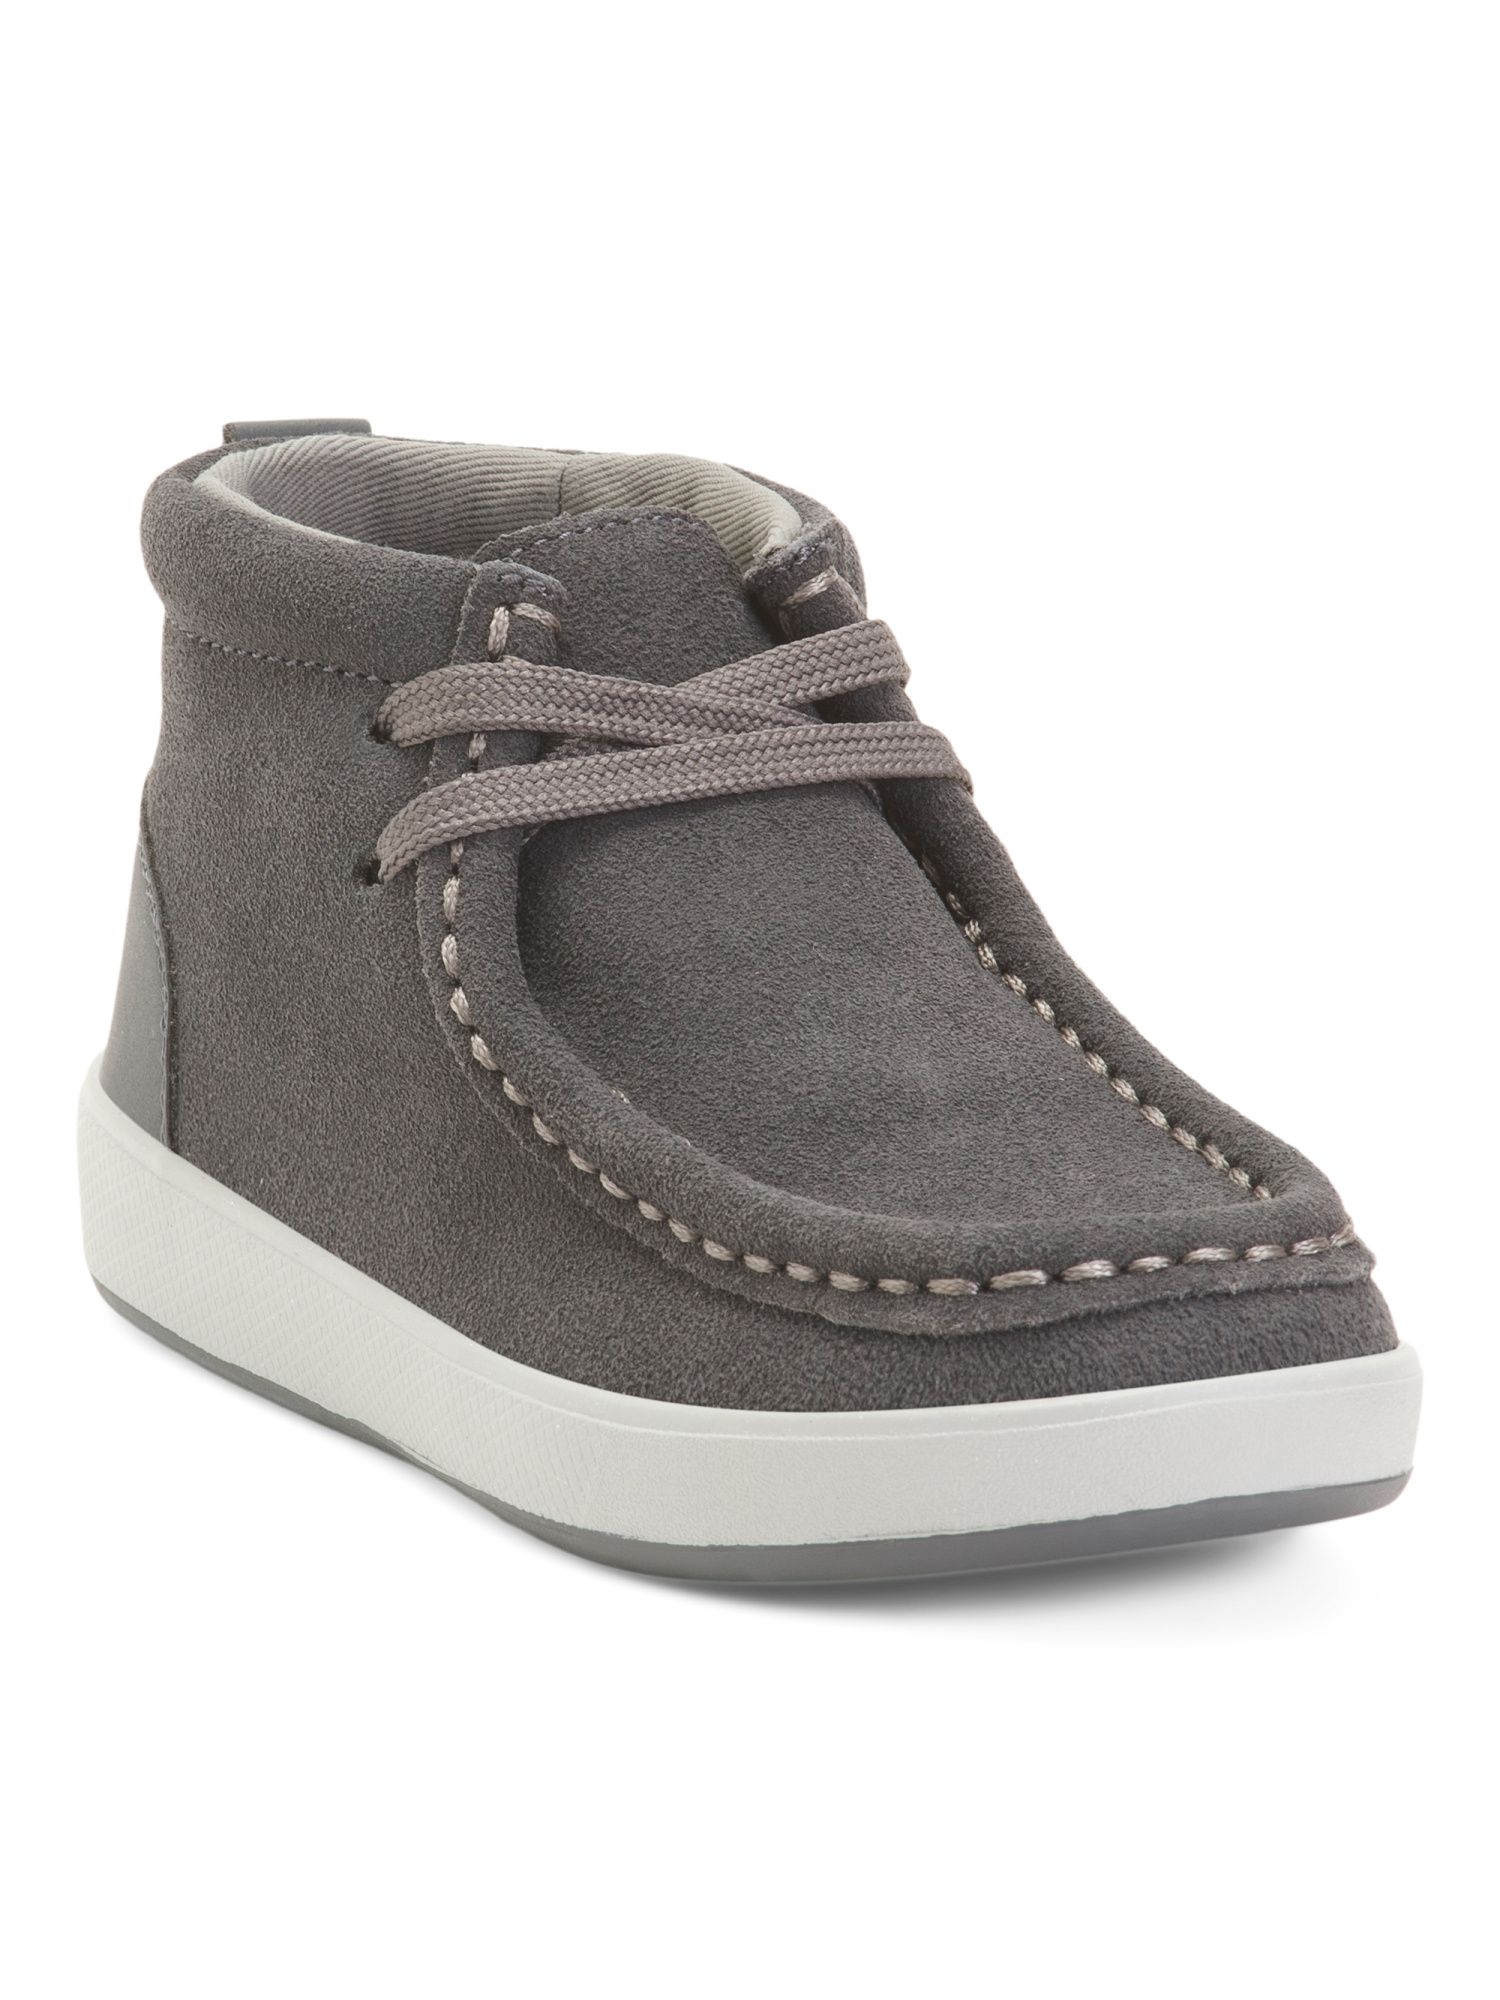 Brennon Suede High Top Moccasin Boots (little Kid, Big Kid) | Boys' Shoes | Marshalls | Marshalls